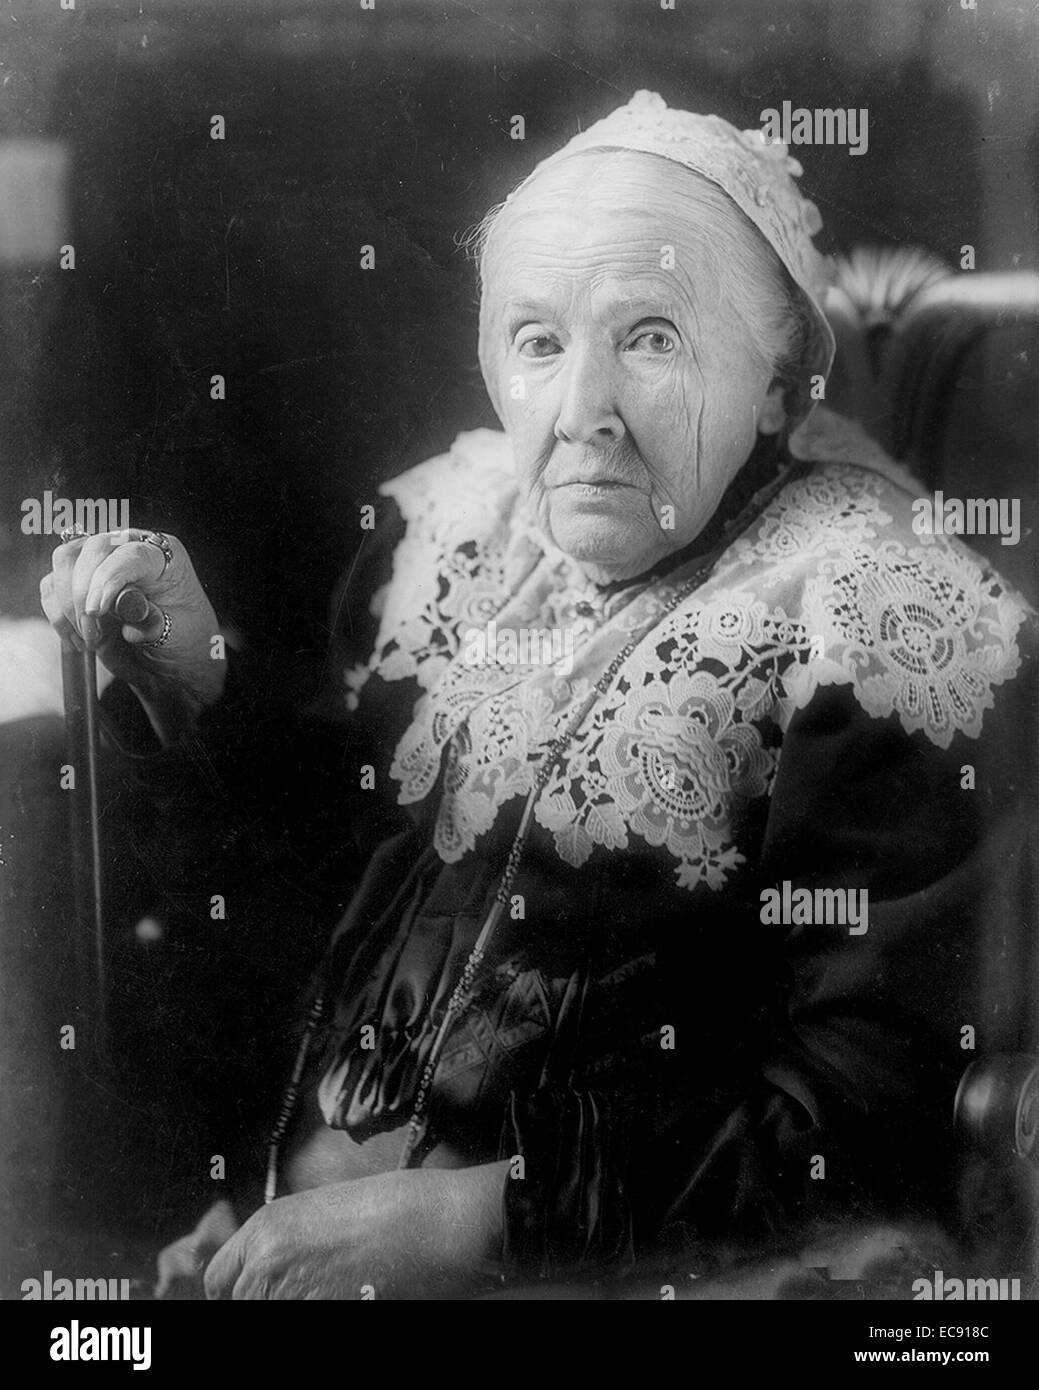 Julia Ward Howe, half-length portrait, seated, facing left   was a prominent American abolitionist, social activist, poet, and the author of 'The Battle Hymn of the Republic'. Stock Photo